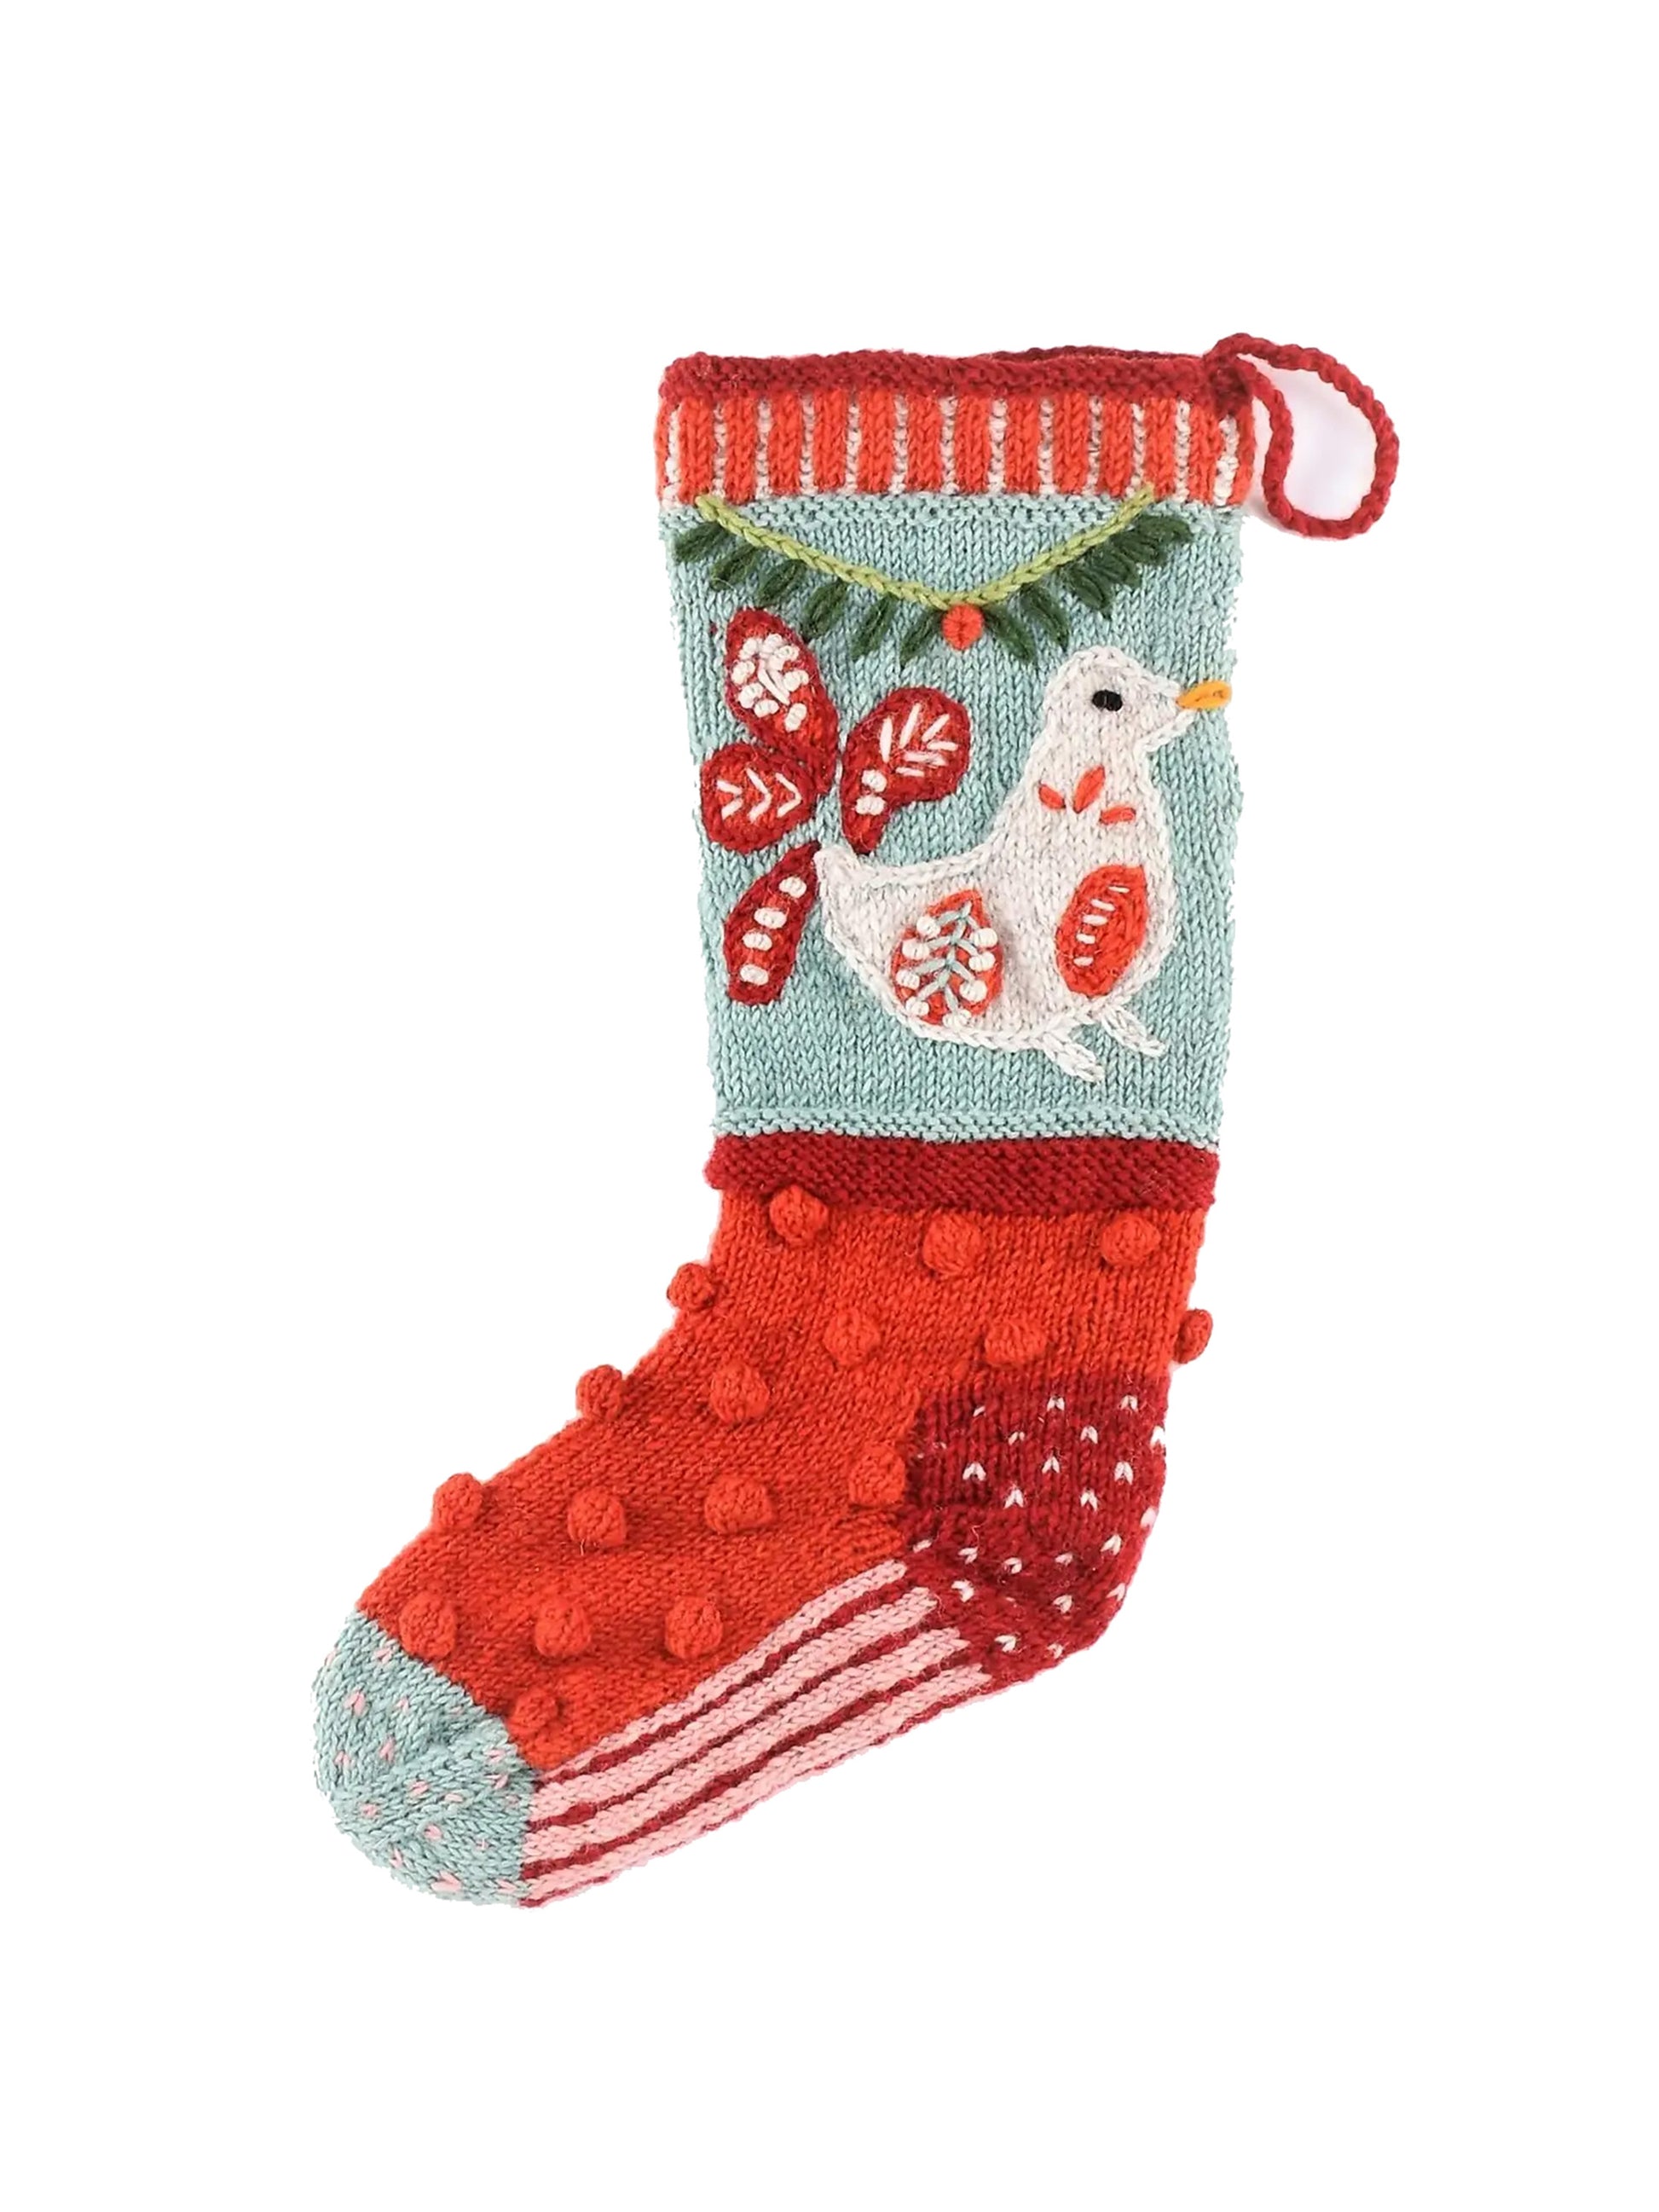 Dove Wool Knit Christmas Stocking Weston Table